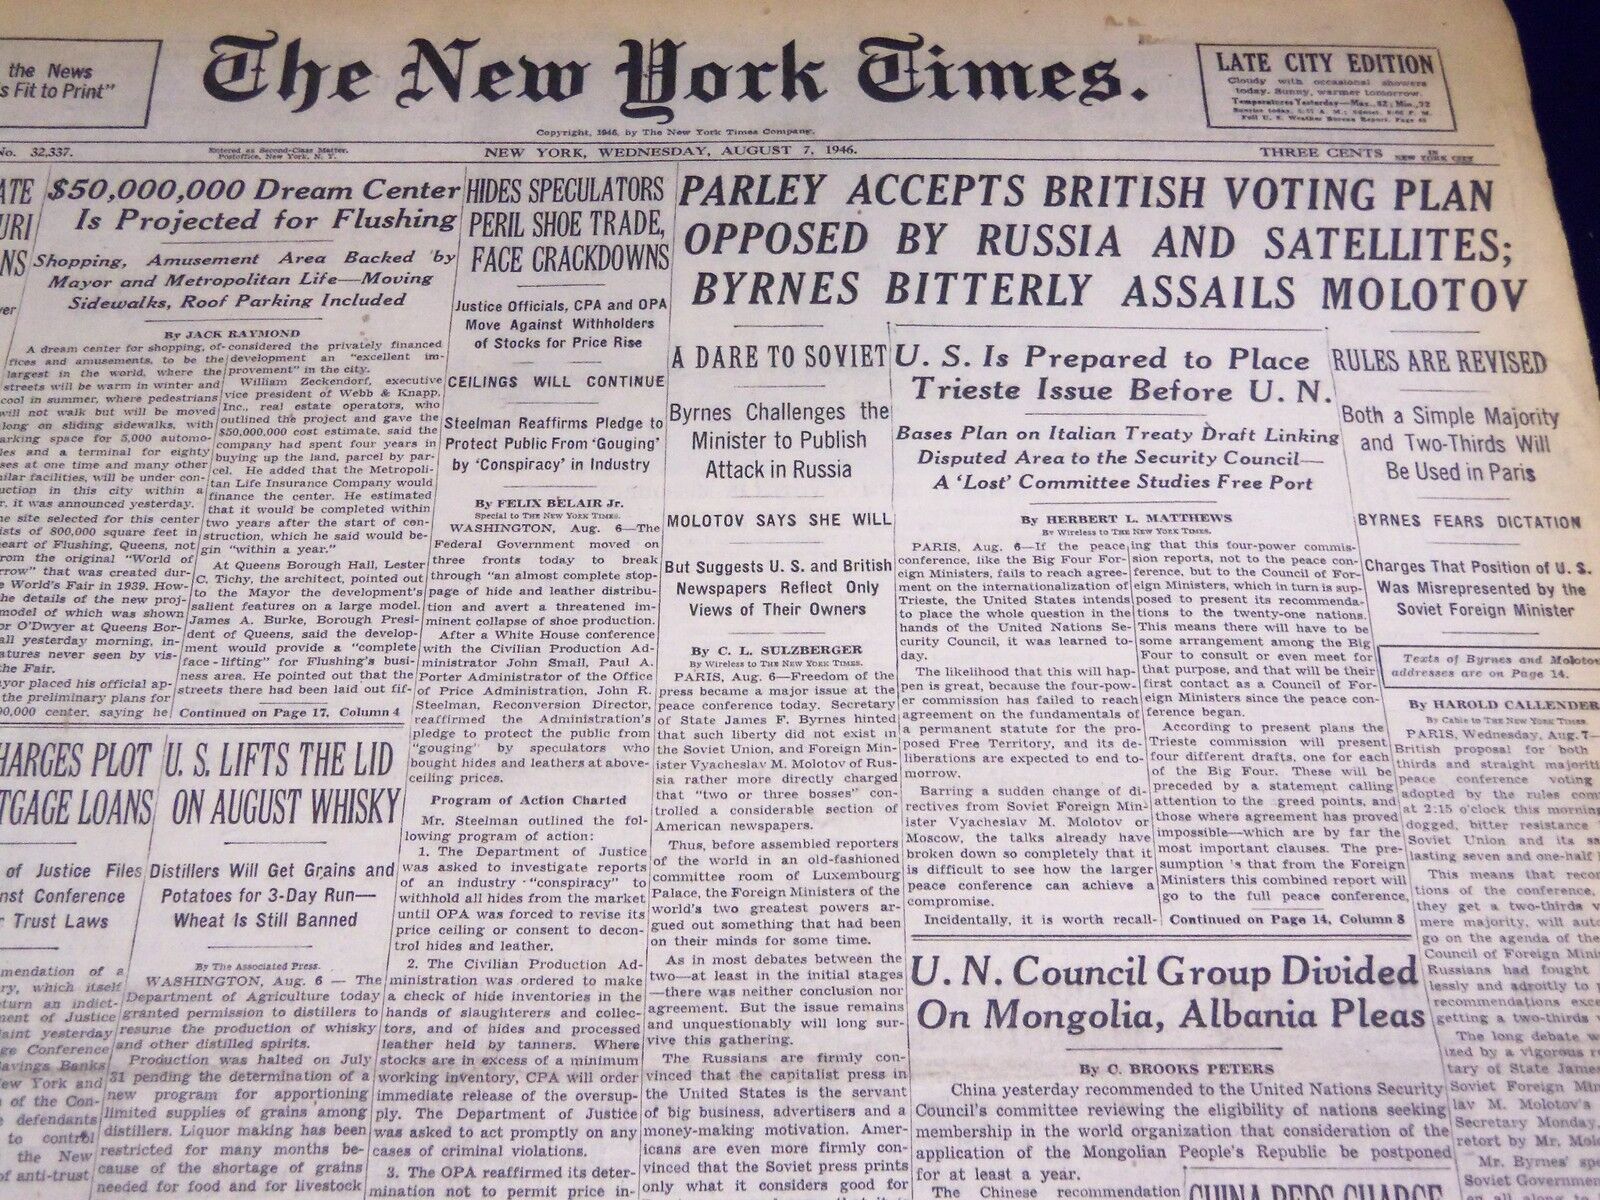 1946 AUGUST 7 NEW YORK TIMES - BYRNES BITTERLY ASSAILS MOLOTOV - NT 2347